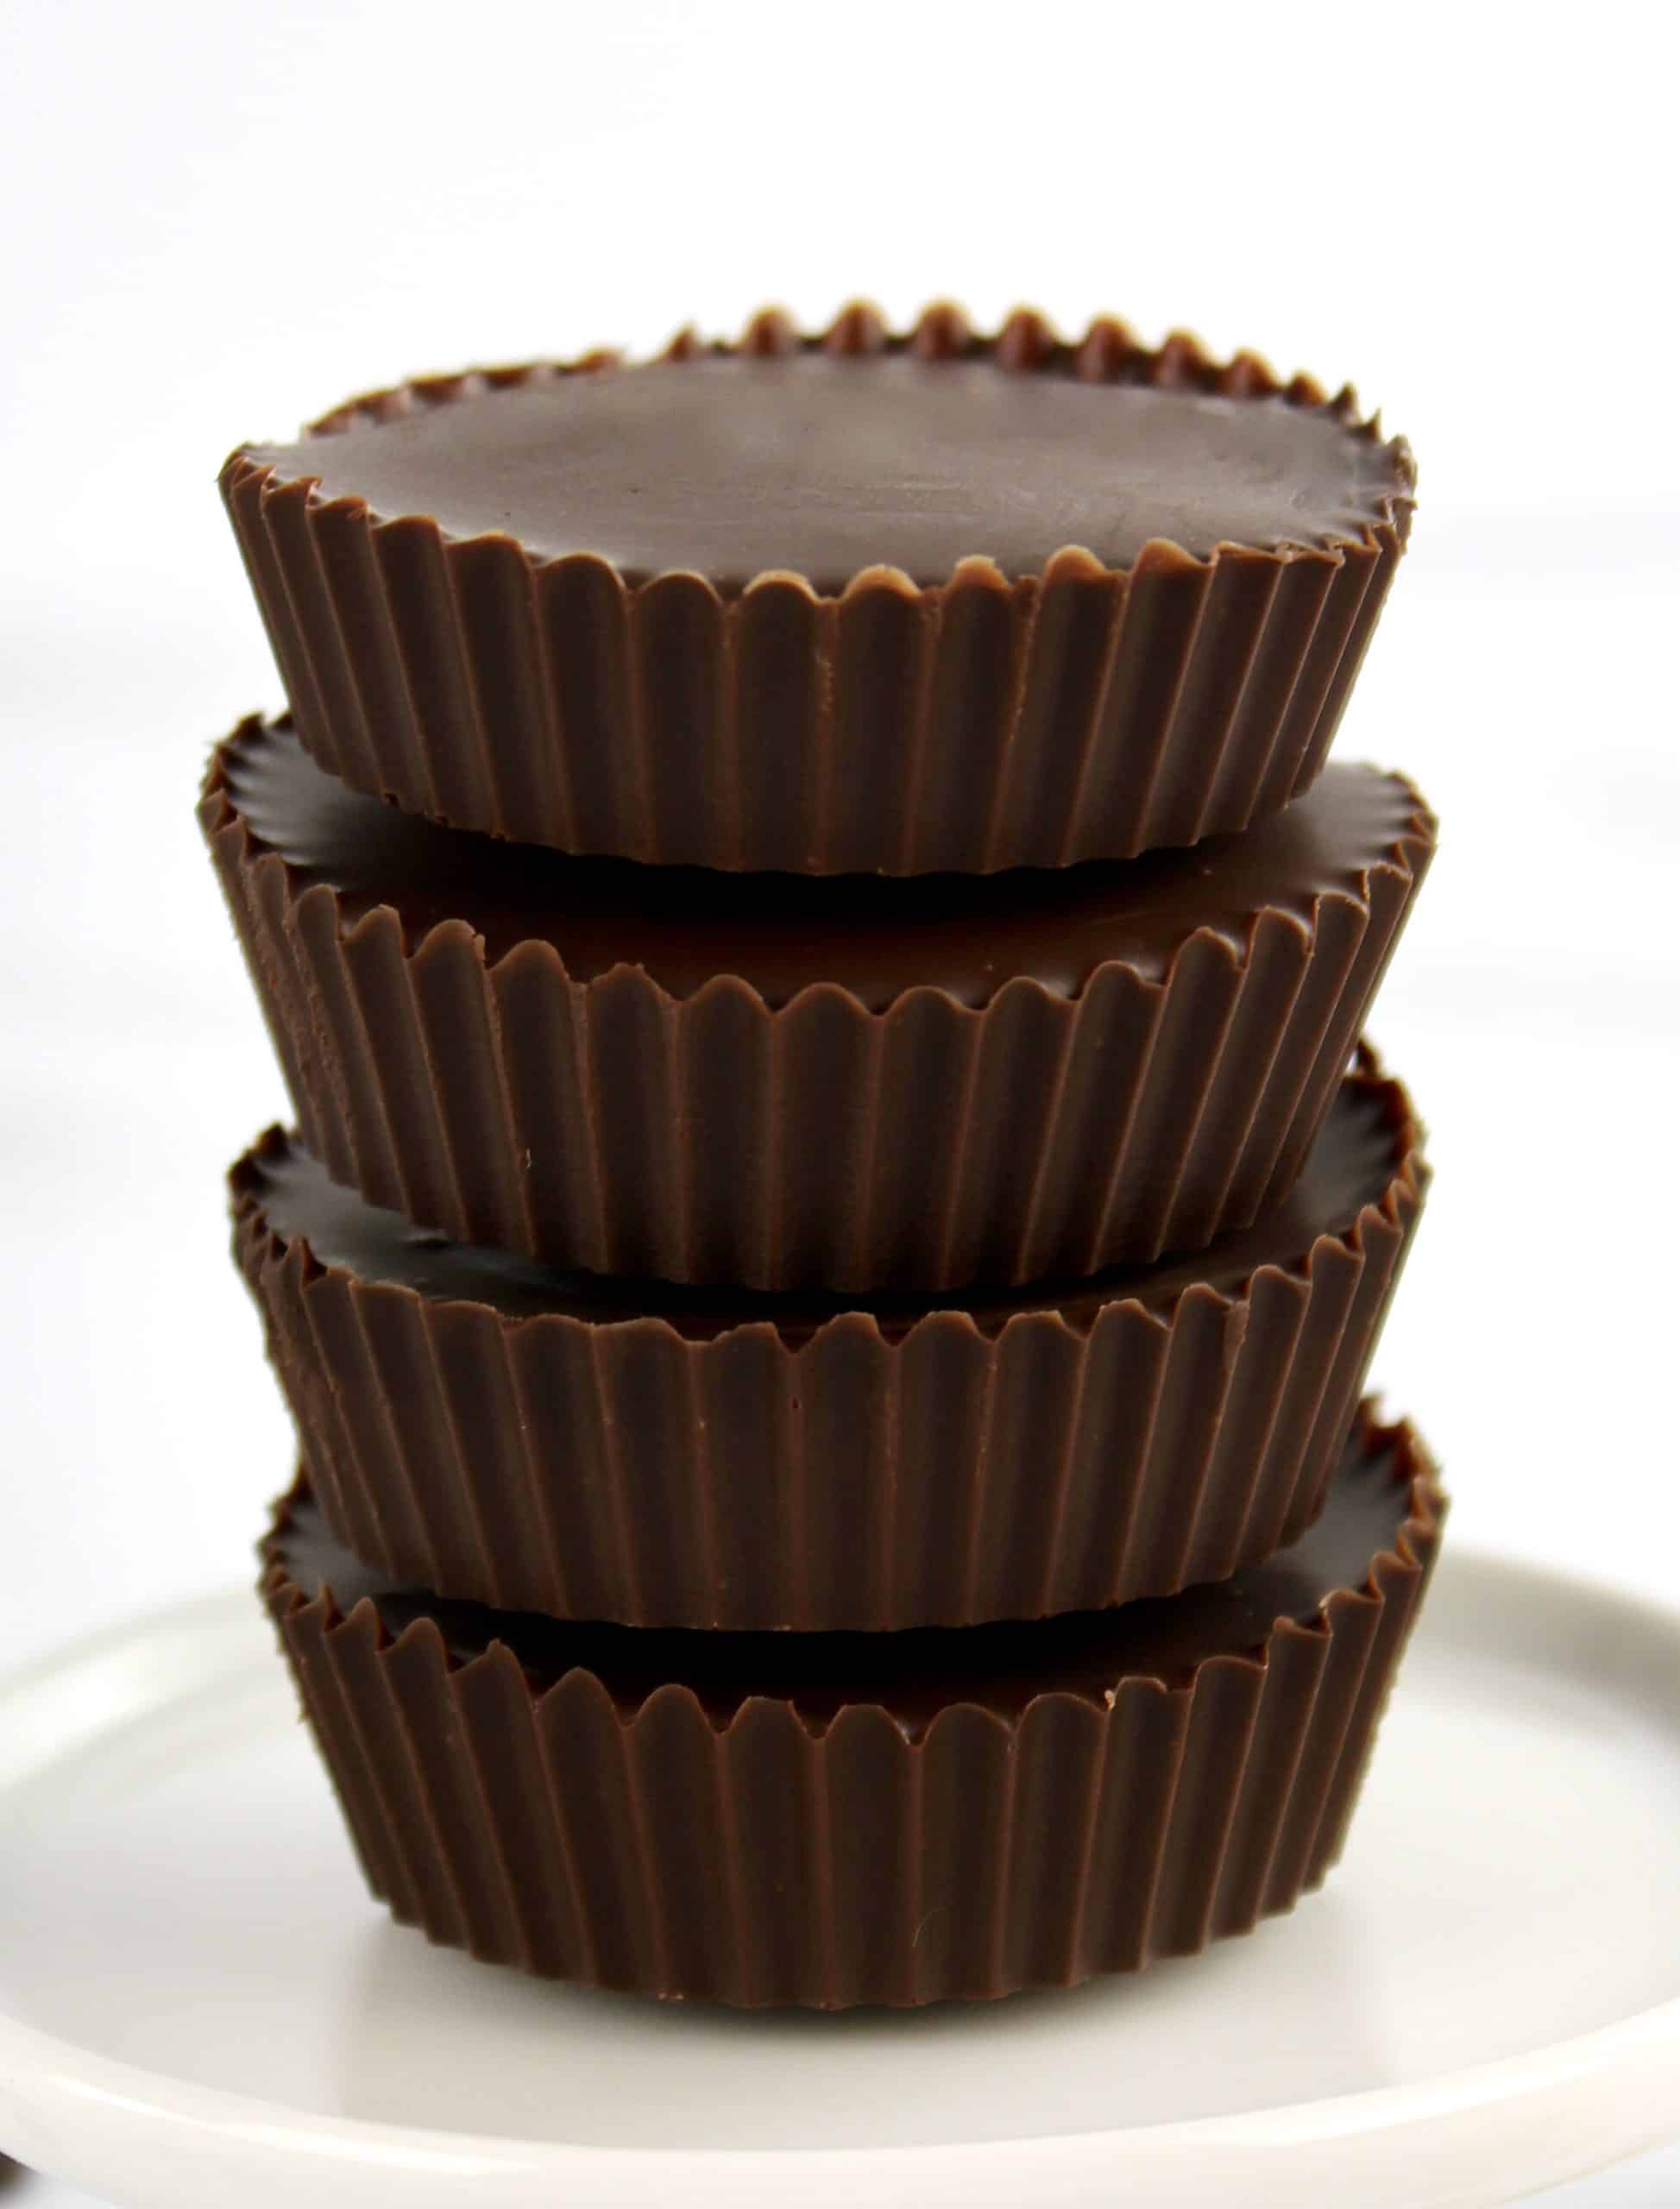 stack of 4 Keto Peanut Butter Cups